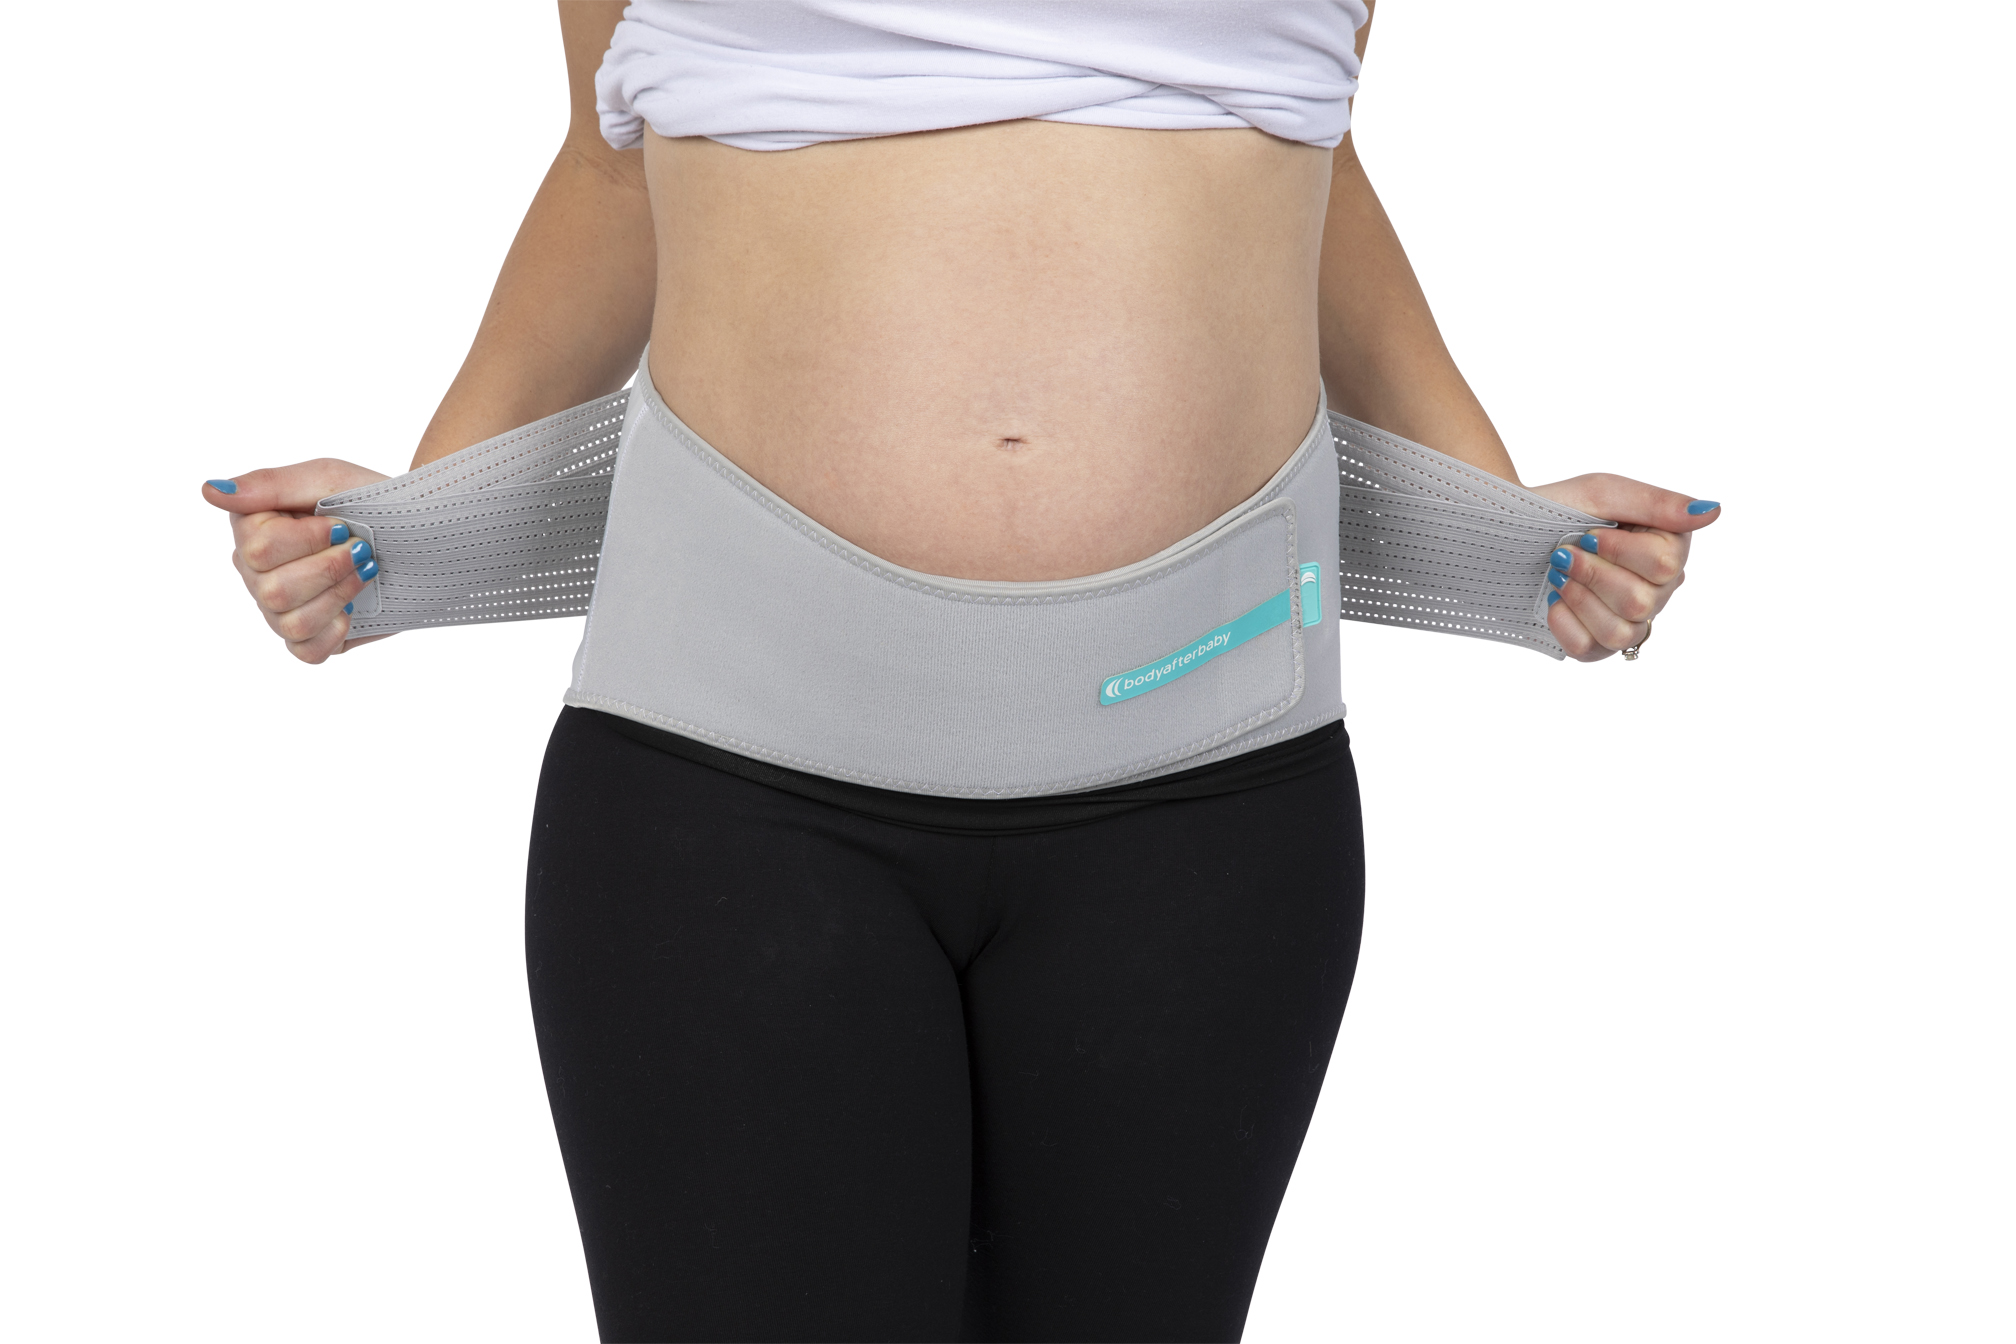 Why do compression garments help me during my pregnancy and after